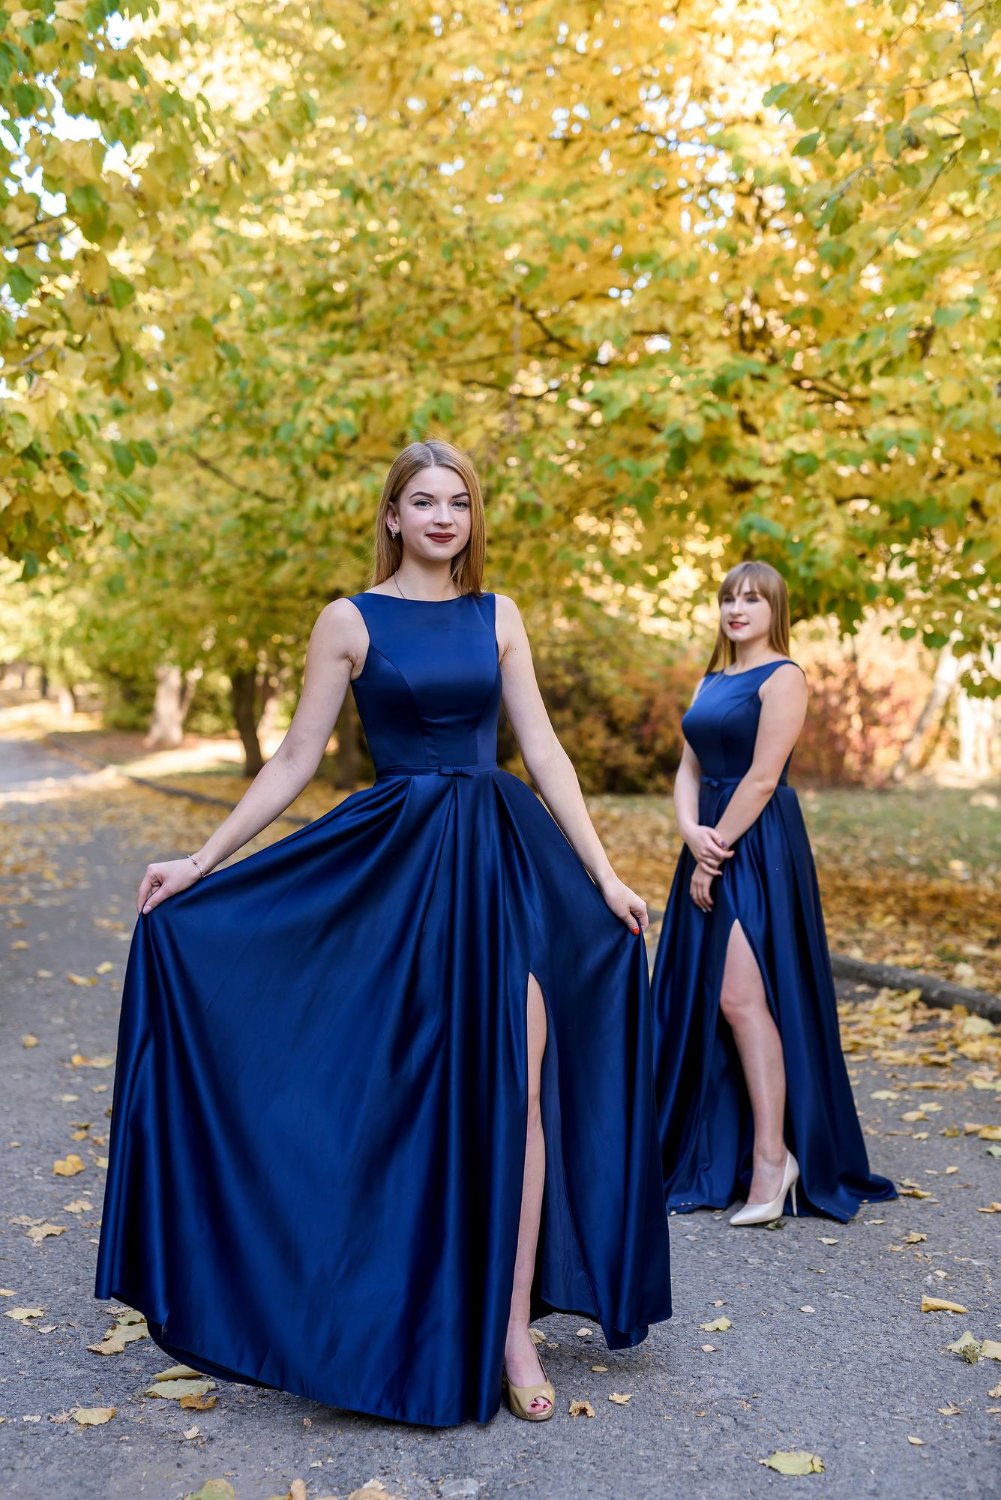 how to accessorize a navy blue dress for a wedding